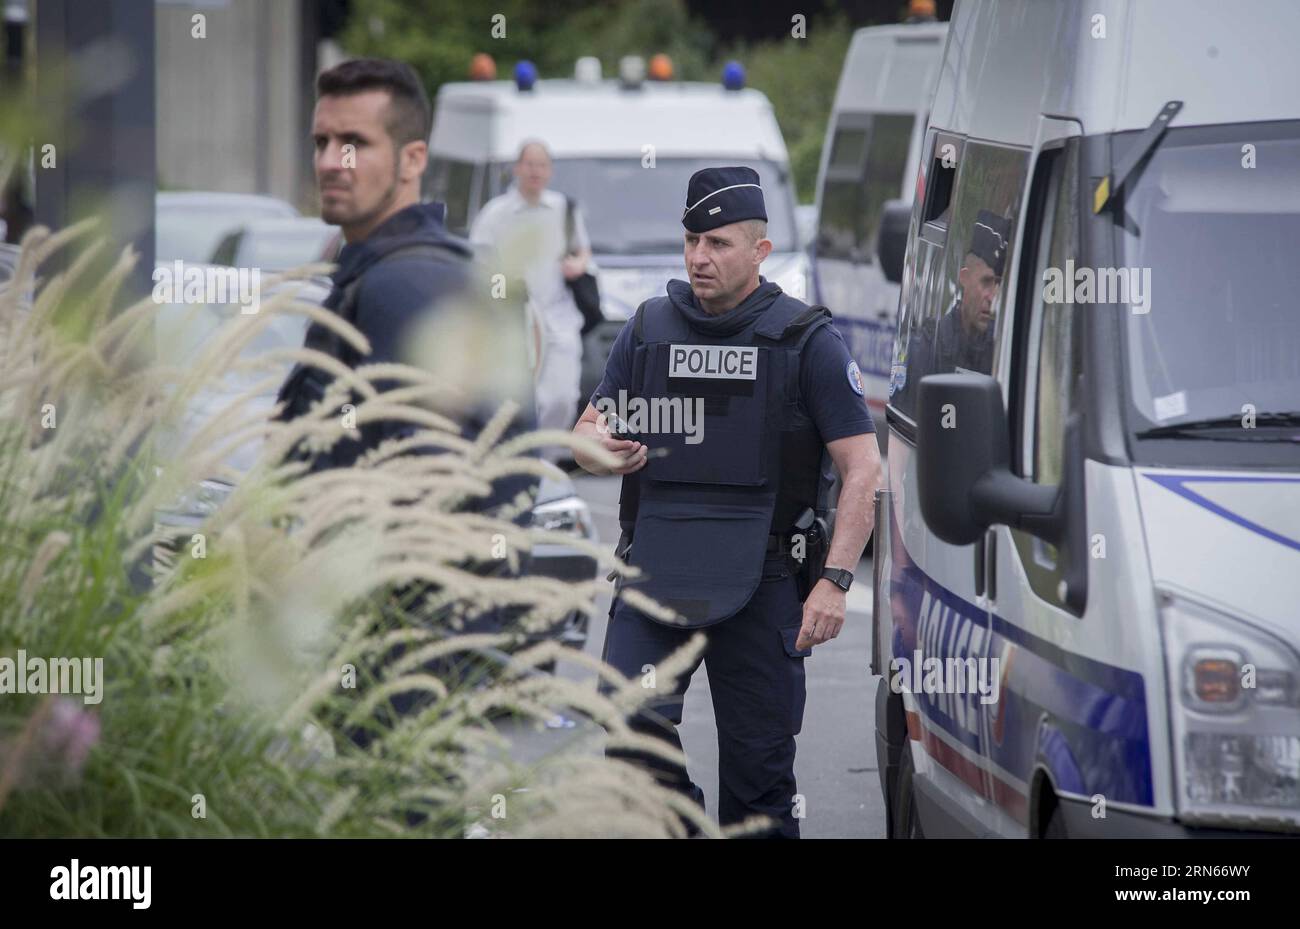 AKTUELLES ZEITGESCHEHEN Geiselnahme bei Paris (150713) -- PARIS, July 13, 2015 -- Police officers stand guard outside the site of a hostage helding in Paris, France, July 13, 2015. About 18 people have been evacuated from the shopping center where gunmen held employees hostage Monday morning in Villeneuve-la-Garenne, west Paris, police said. ) FRANCE-PARIS-HOSTAGE ChenxXiaowei PUBLICATIONxNOTxINxCHN   News Current events Hostage-taking at Paris 150713 Paris July 13 2015 Police Officers stand Guard outside The Site of a Hostage helding in Paris France July 13 2015 About 18 Celebrities have been Stock Photo